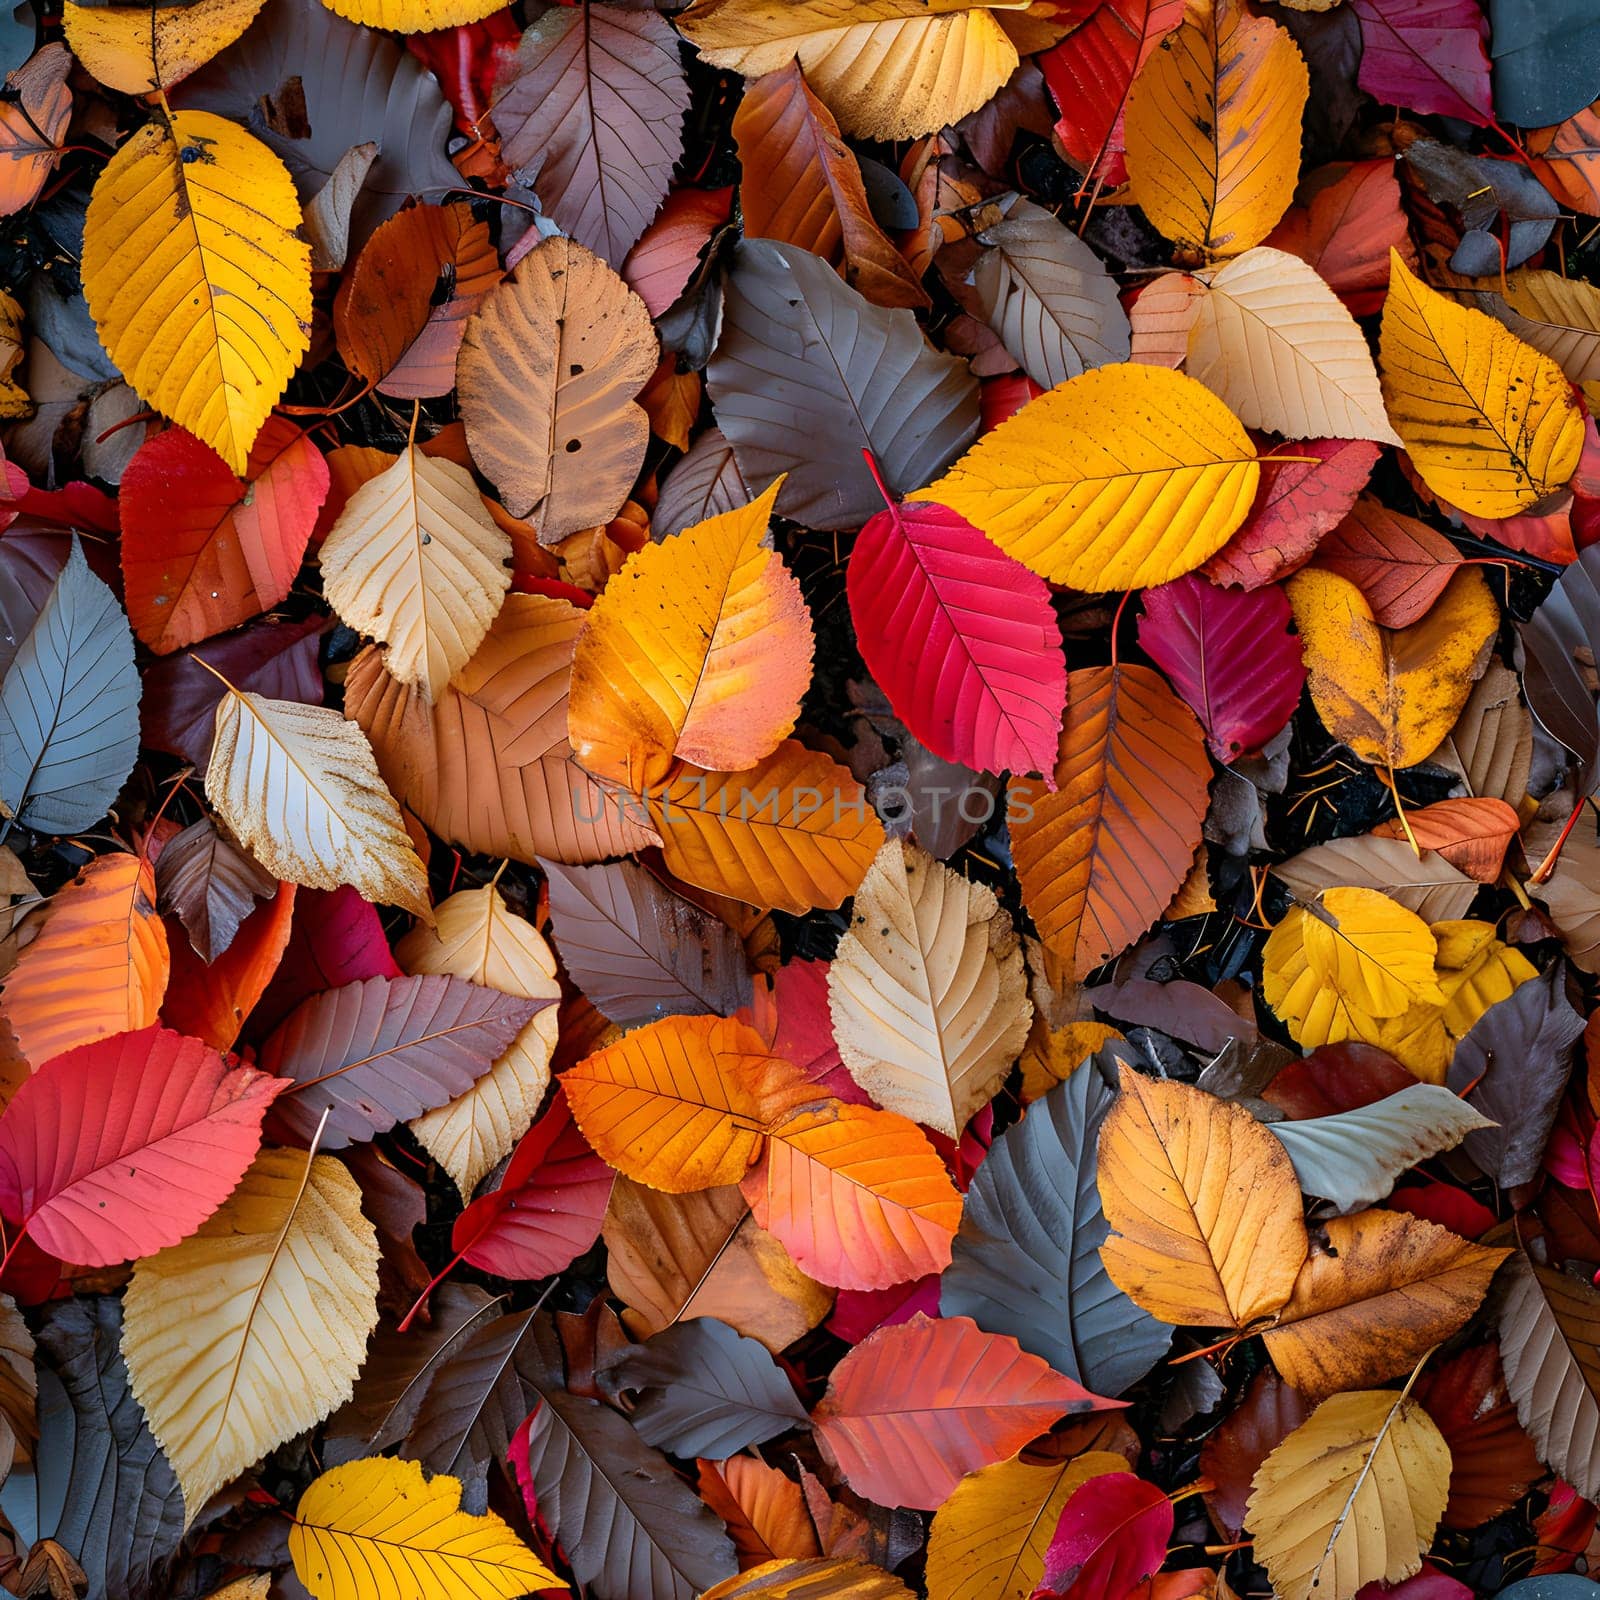 Seamless texture and background of colorful fallen autumnal leaves. Neural network generated image. Not based on any actual scene or pattern.